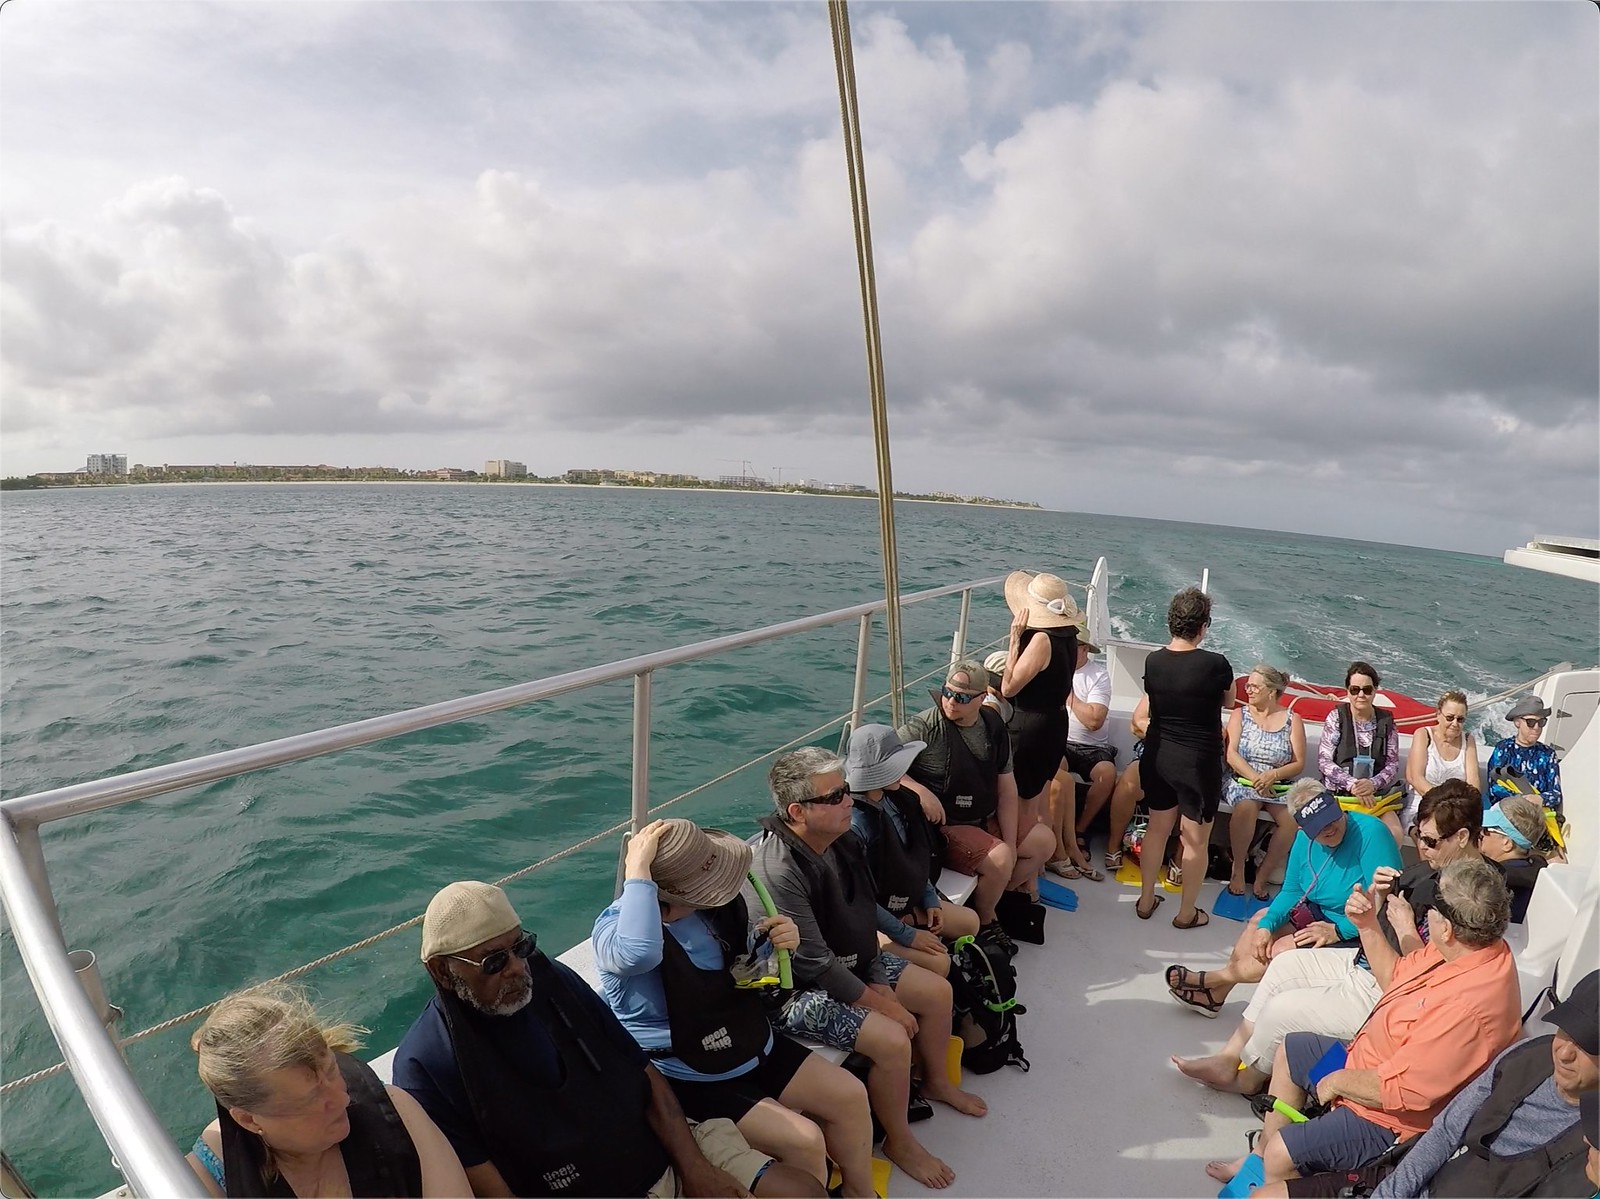 On our way out to the snorkelling site